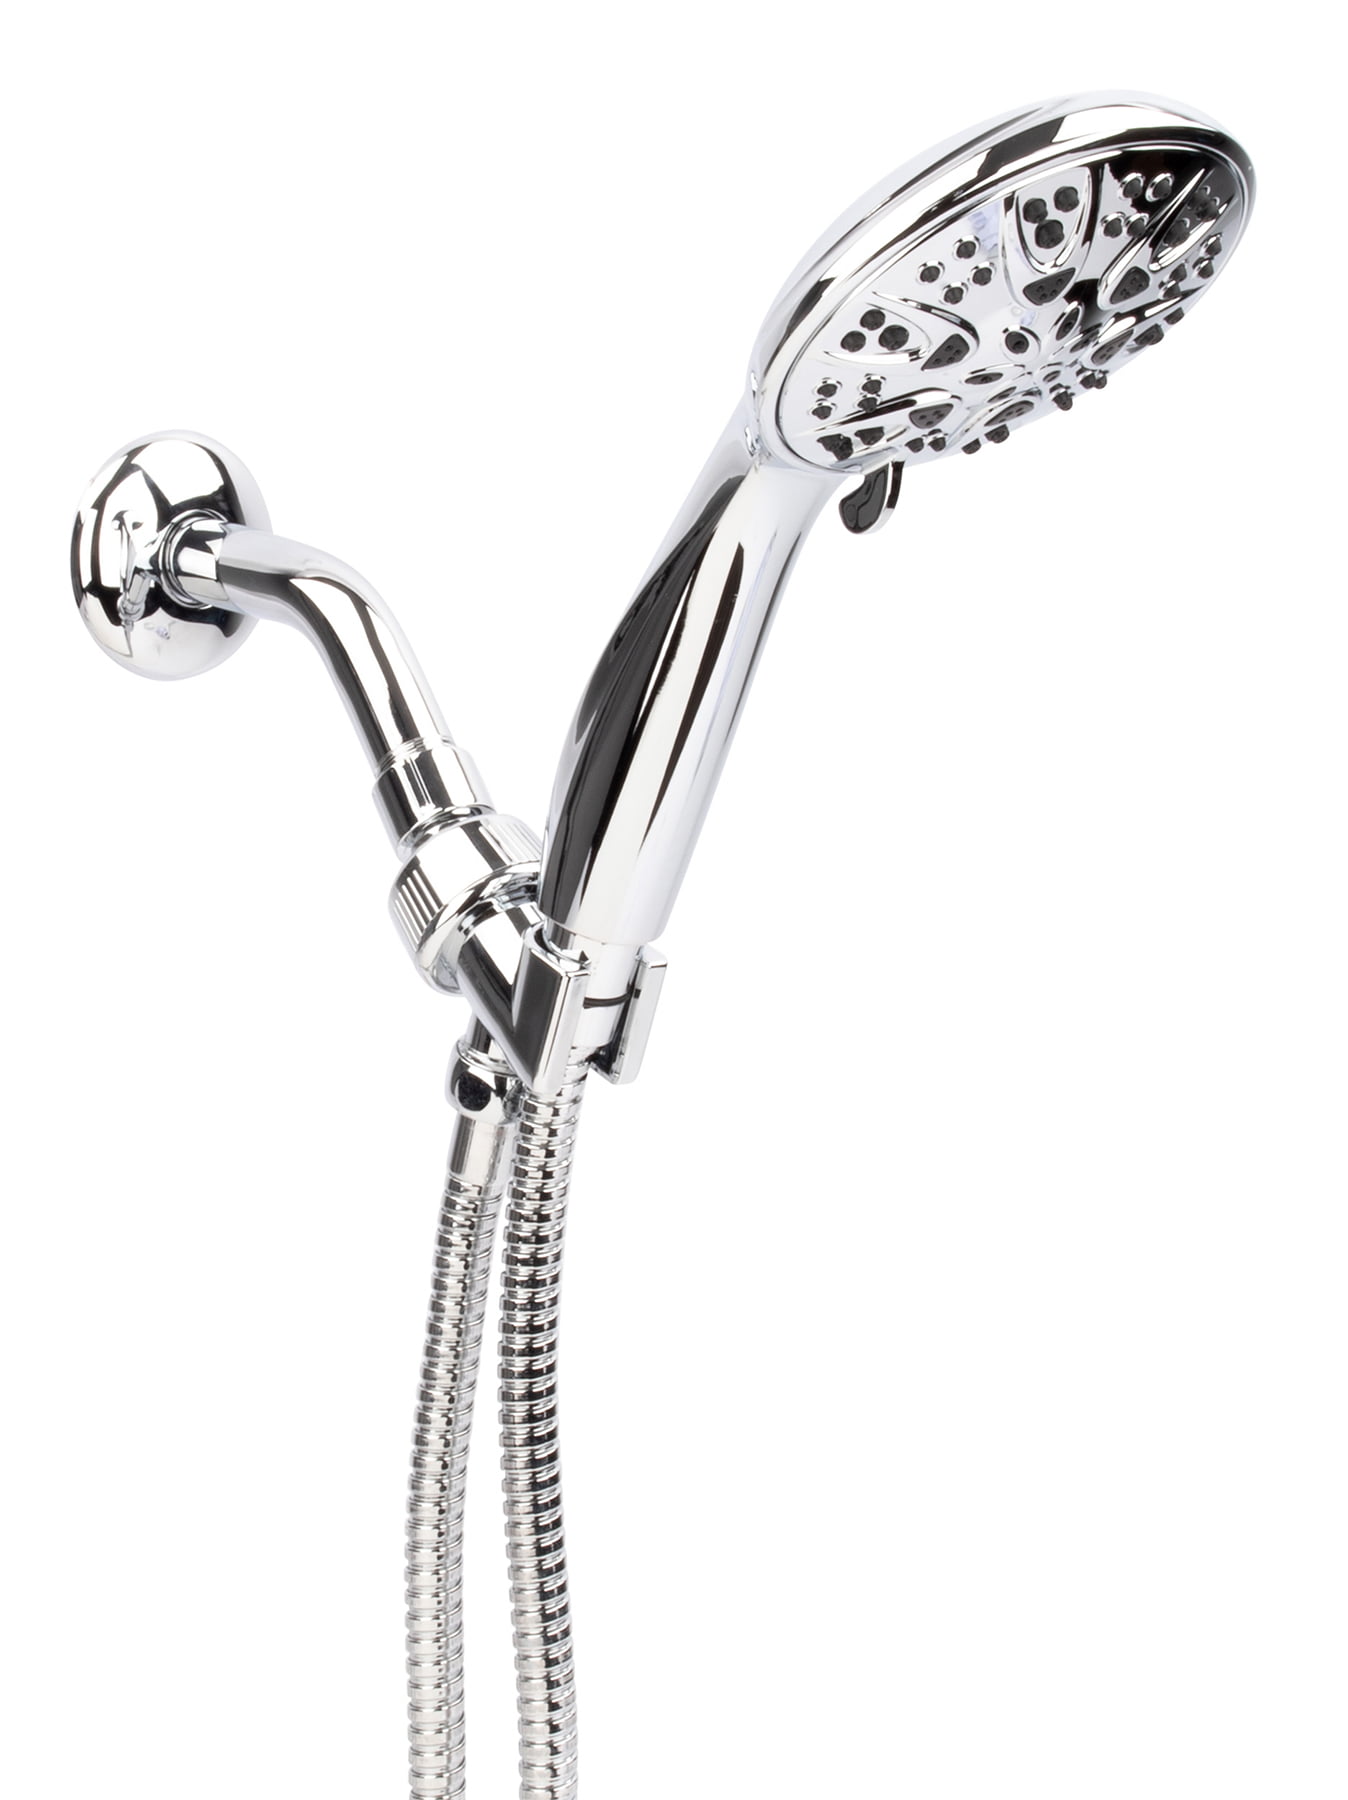 Ldr Industries 520 5142ccp-ws 5-function Hand-held Shower, Chrome